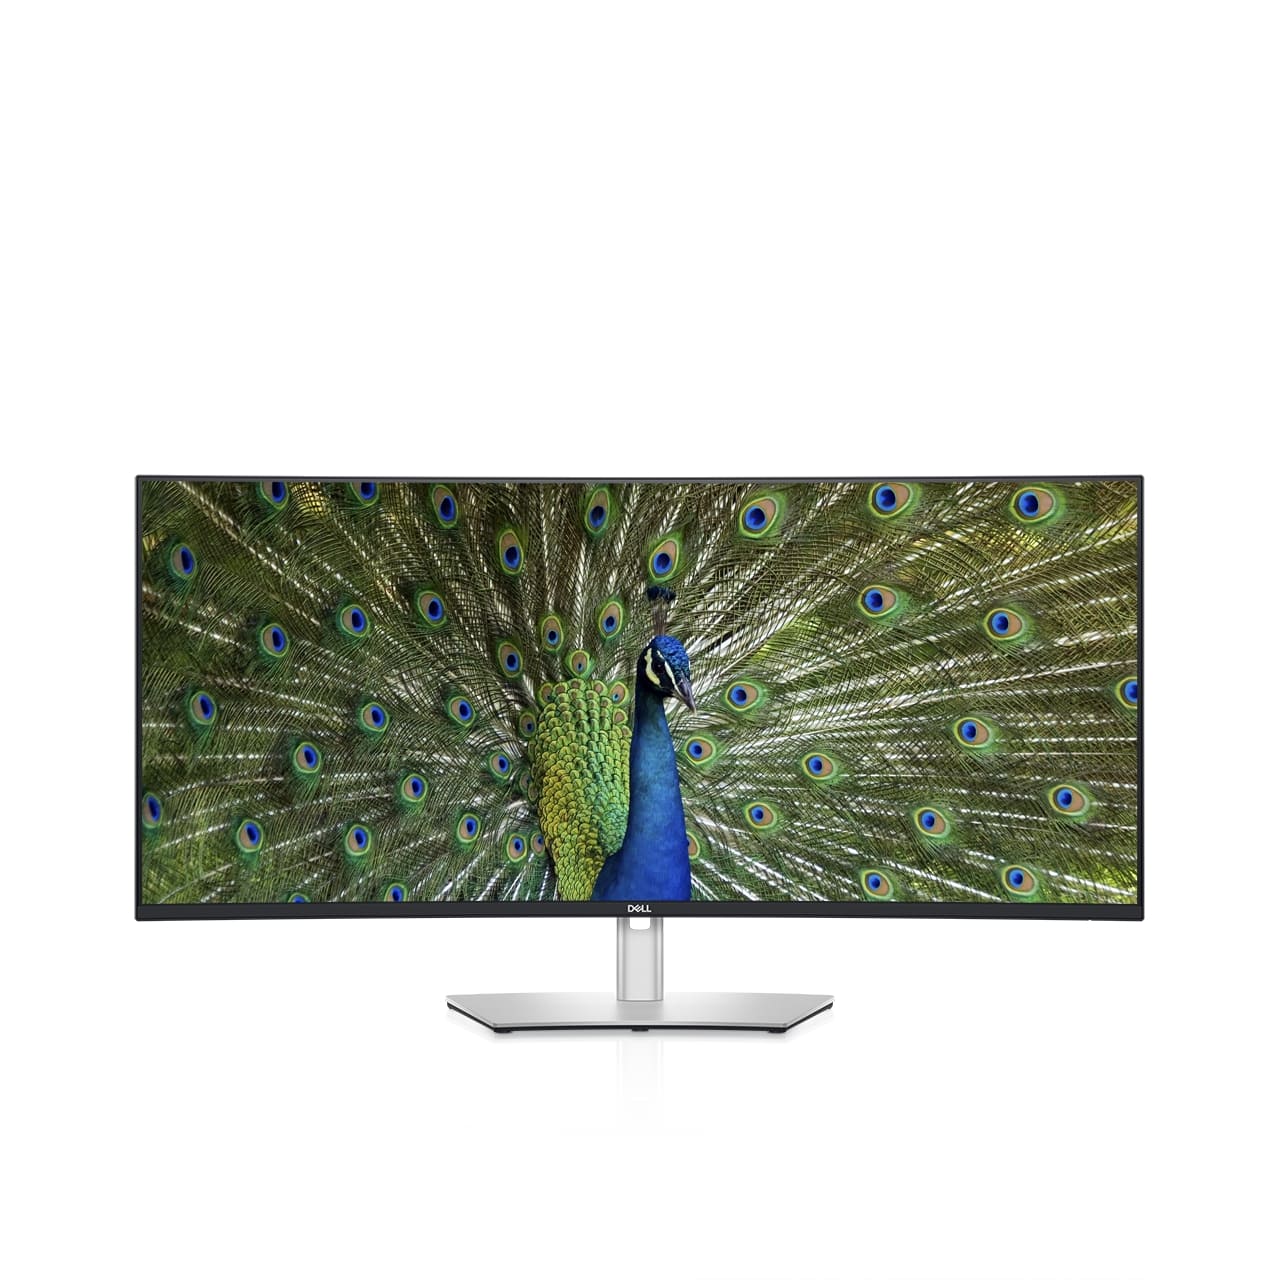 dell refreshes ultrasharp monitors ces 2021 40 curved monitor front 1